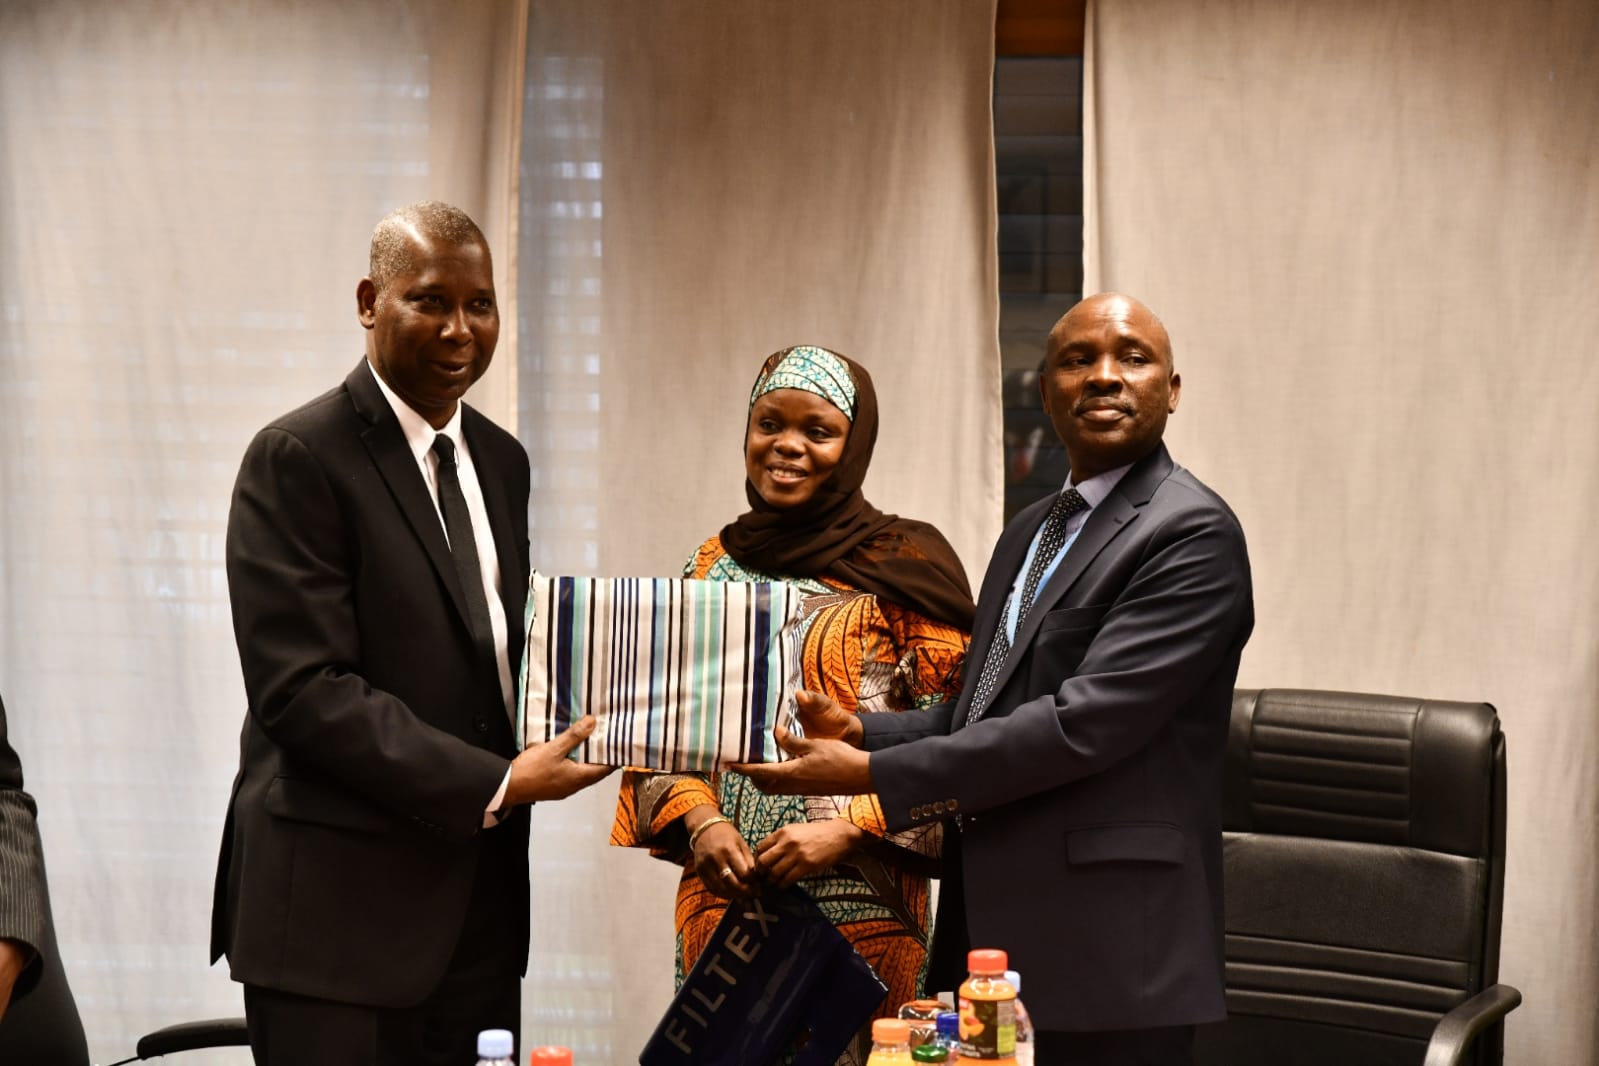 Courtesy Visit of H.E. Tijjani Muhammad Bande, UNGA President to the Mission/H.E. Tijjani M. B. being handed a gift fron the Mission by Charge d